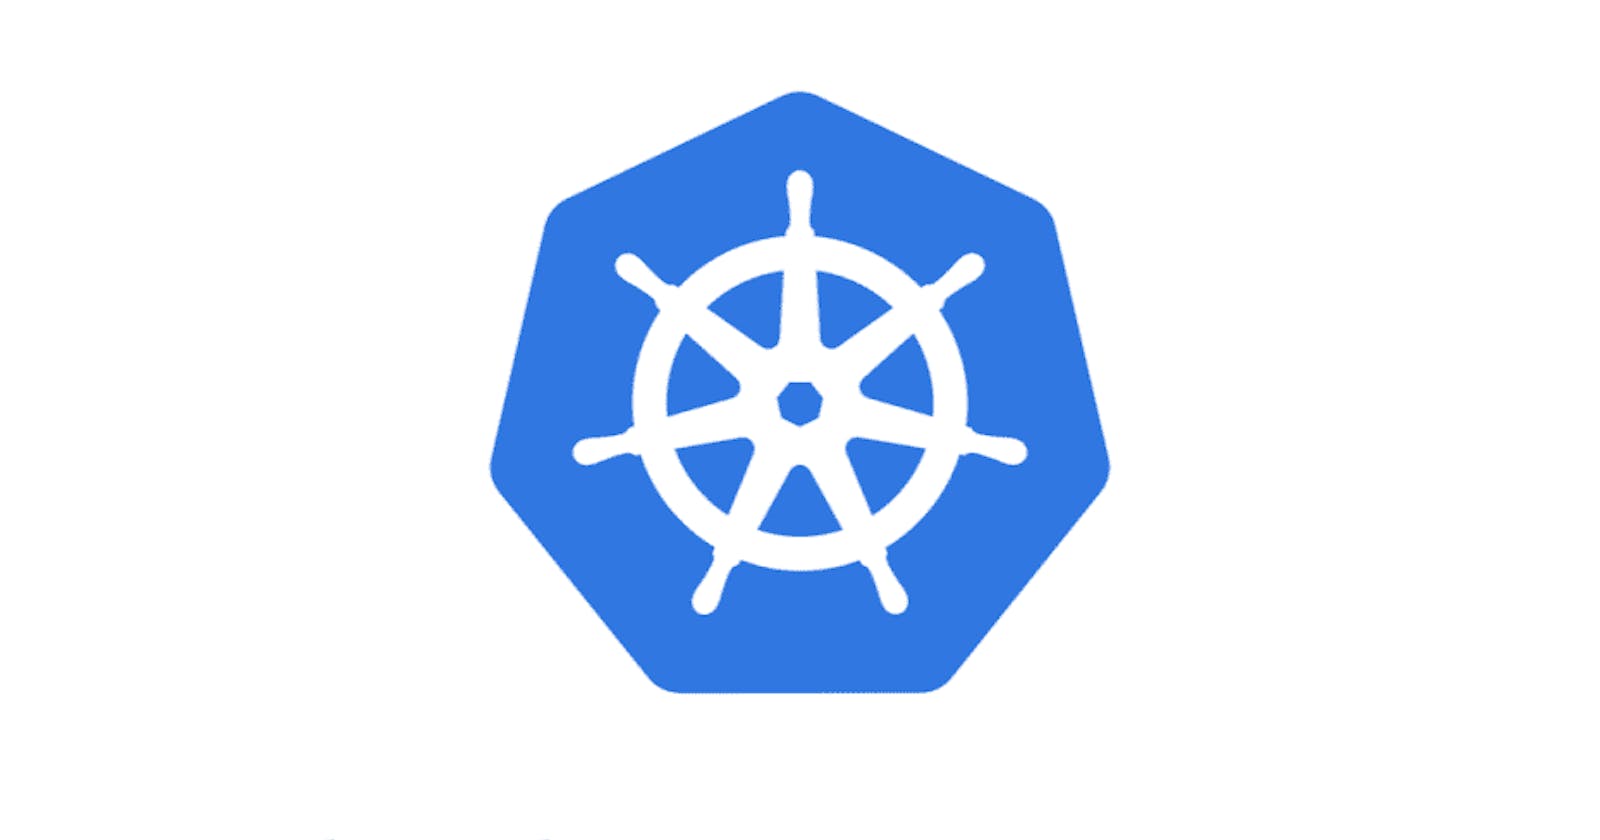 Setup and run your app on Kubernetes locally in your system